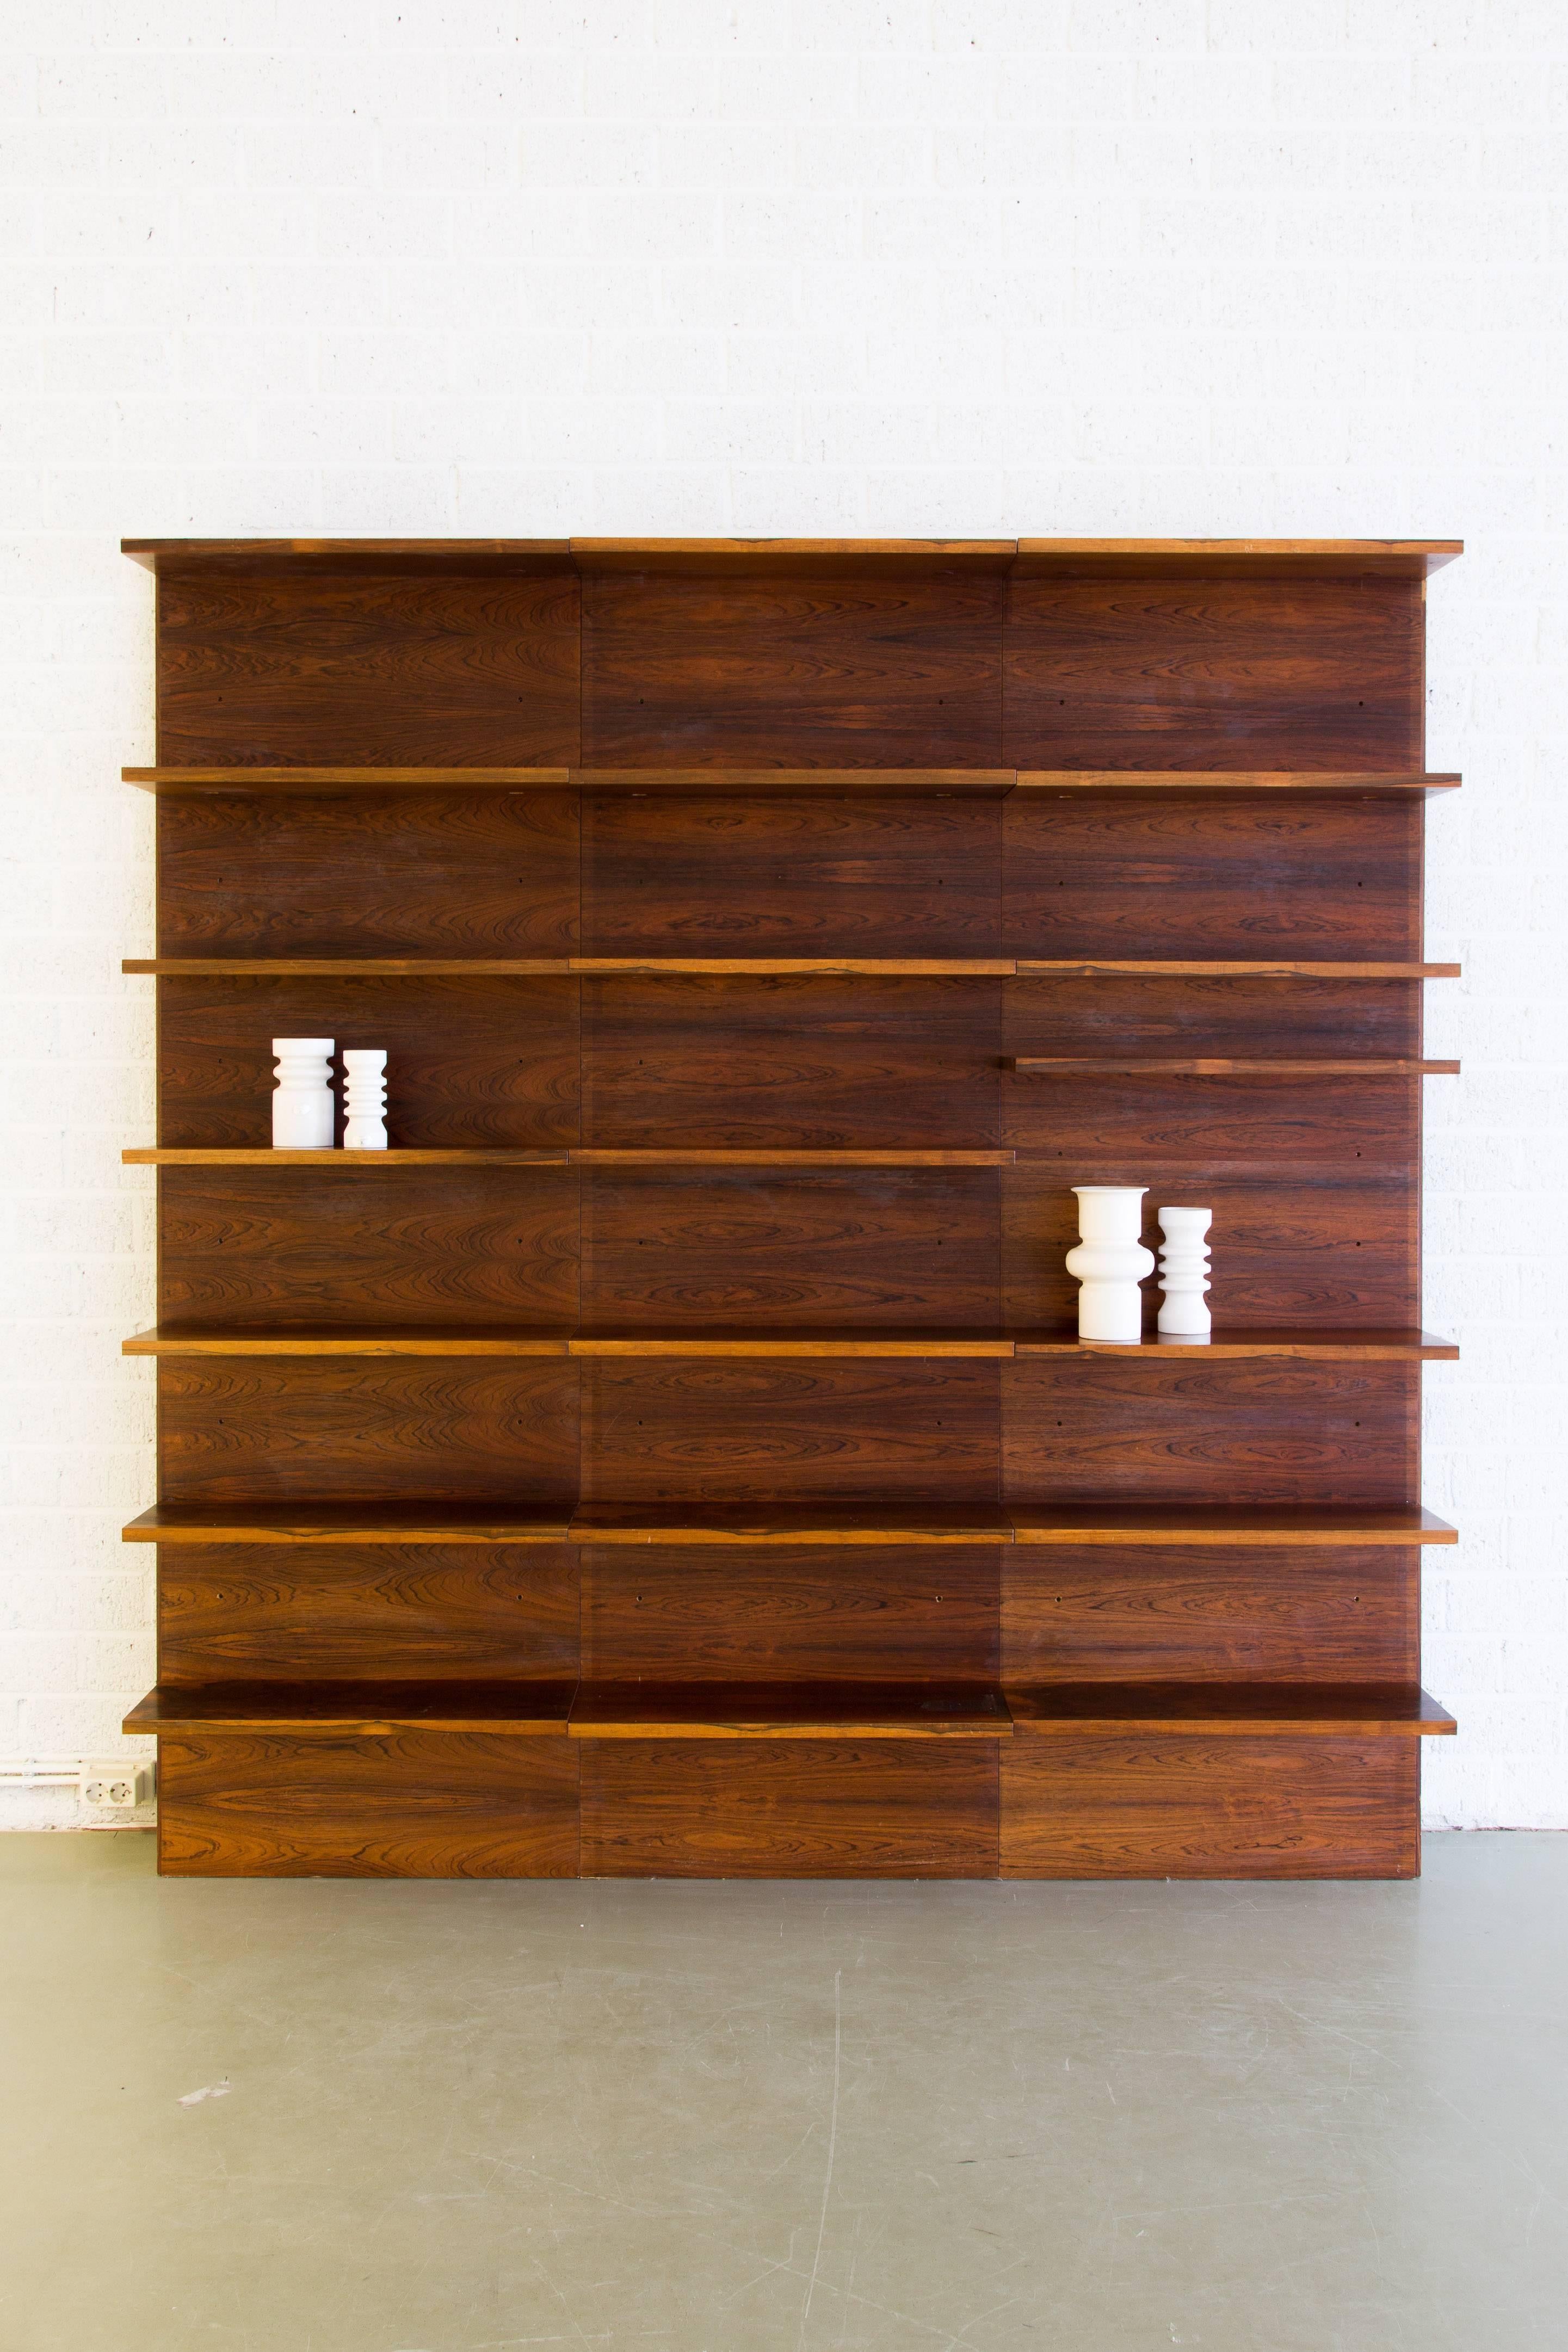 A rosewood bookcase. The shelves can be placed in different ways. The fixingsystem of the shelves is 